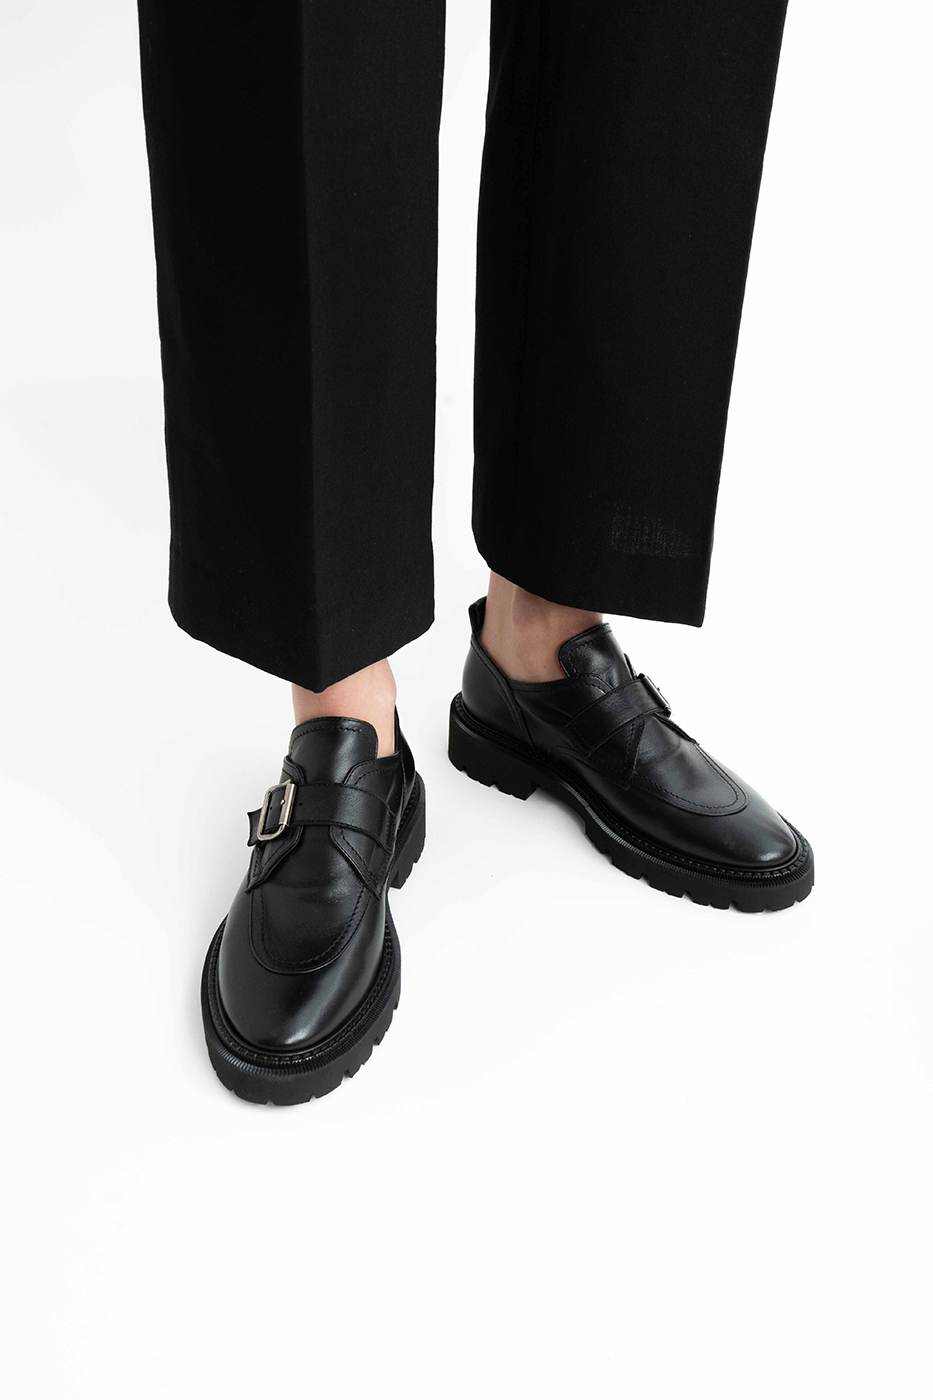 Tenora loafers, black leather